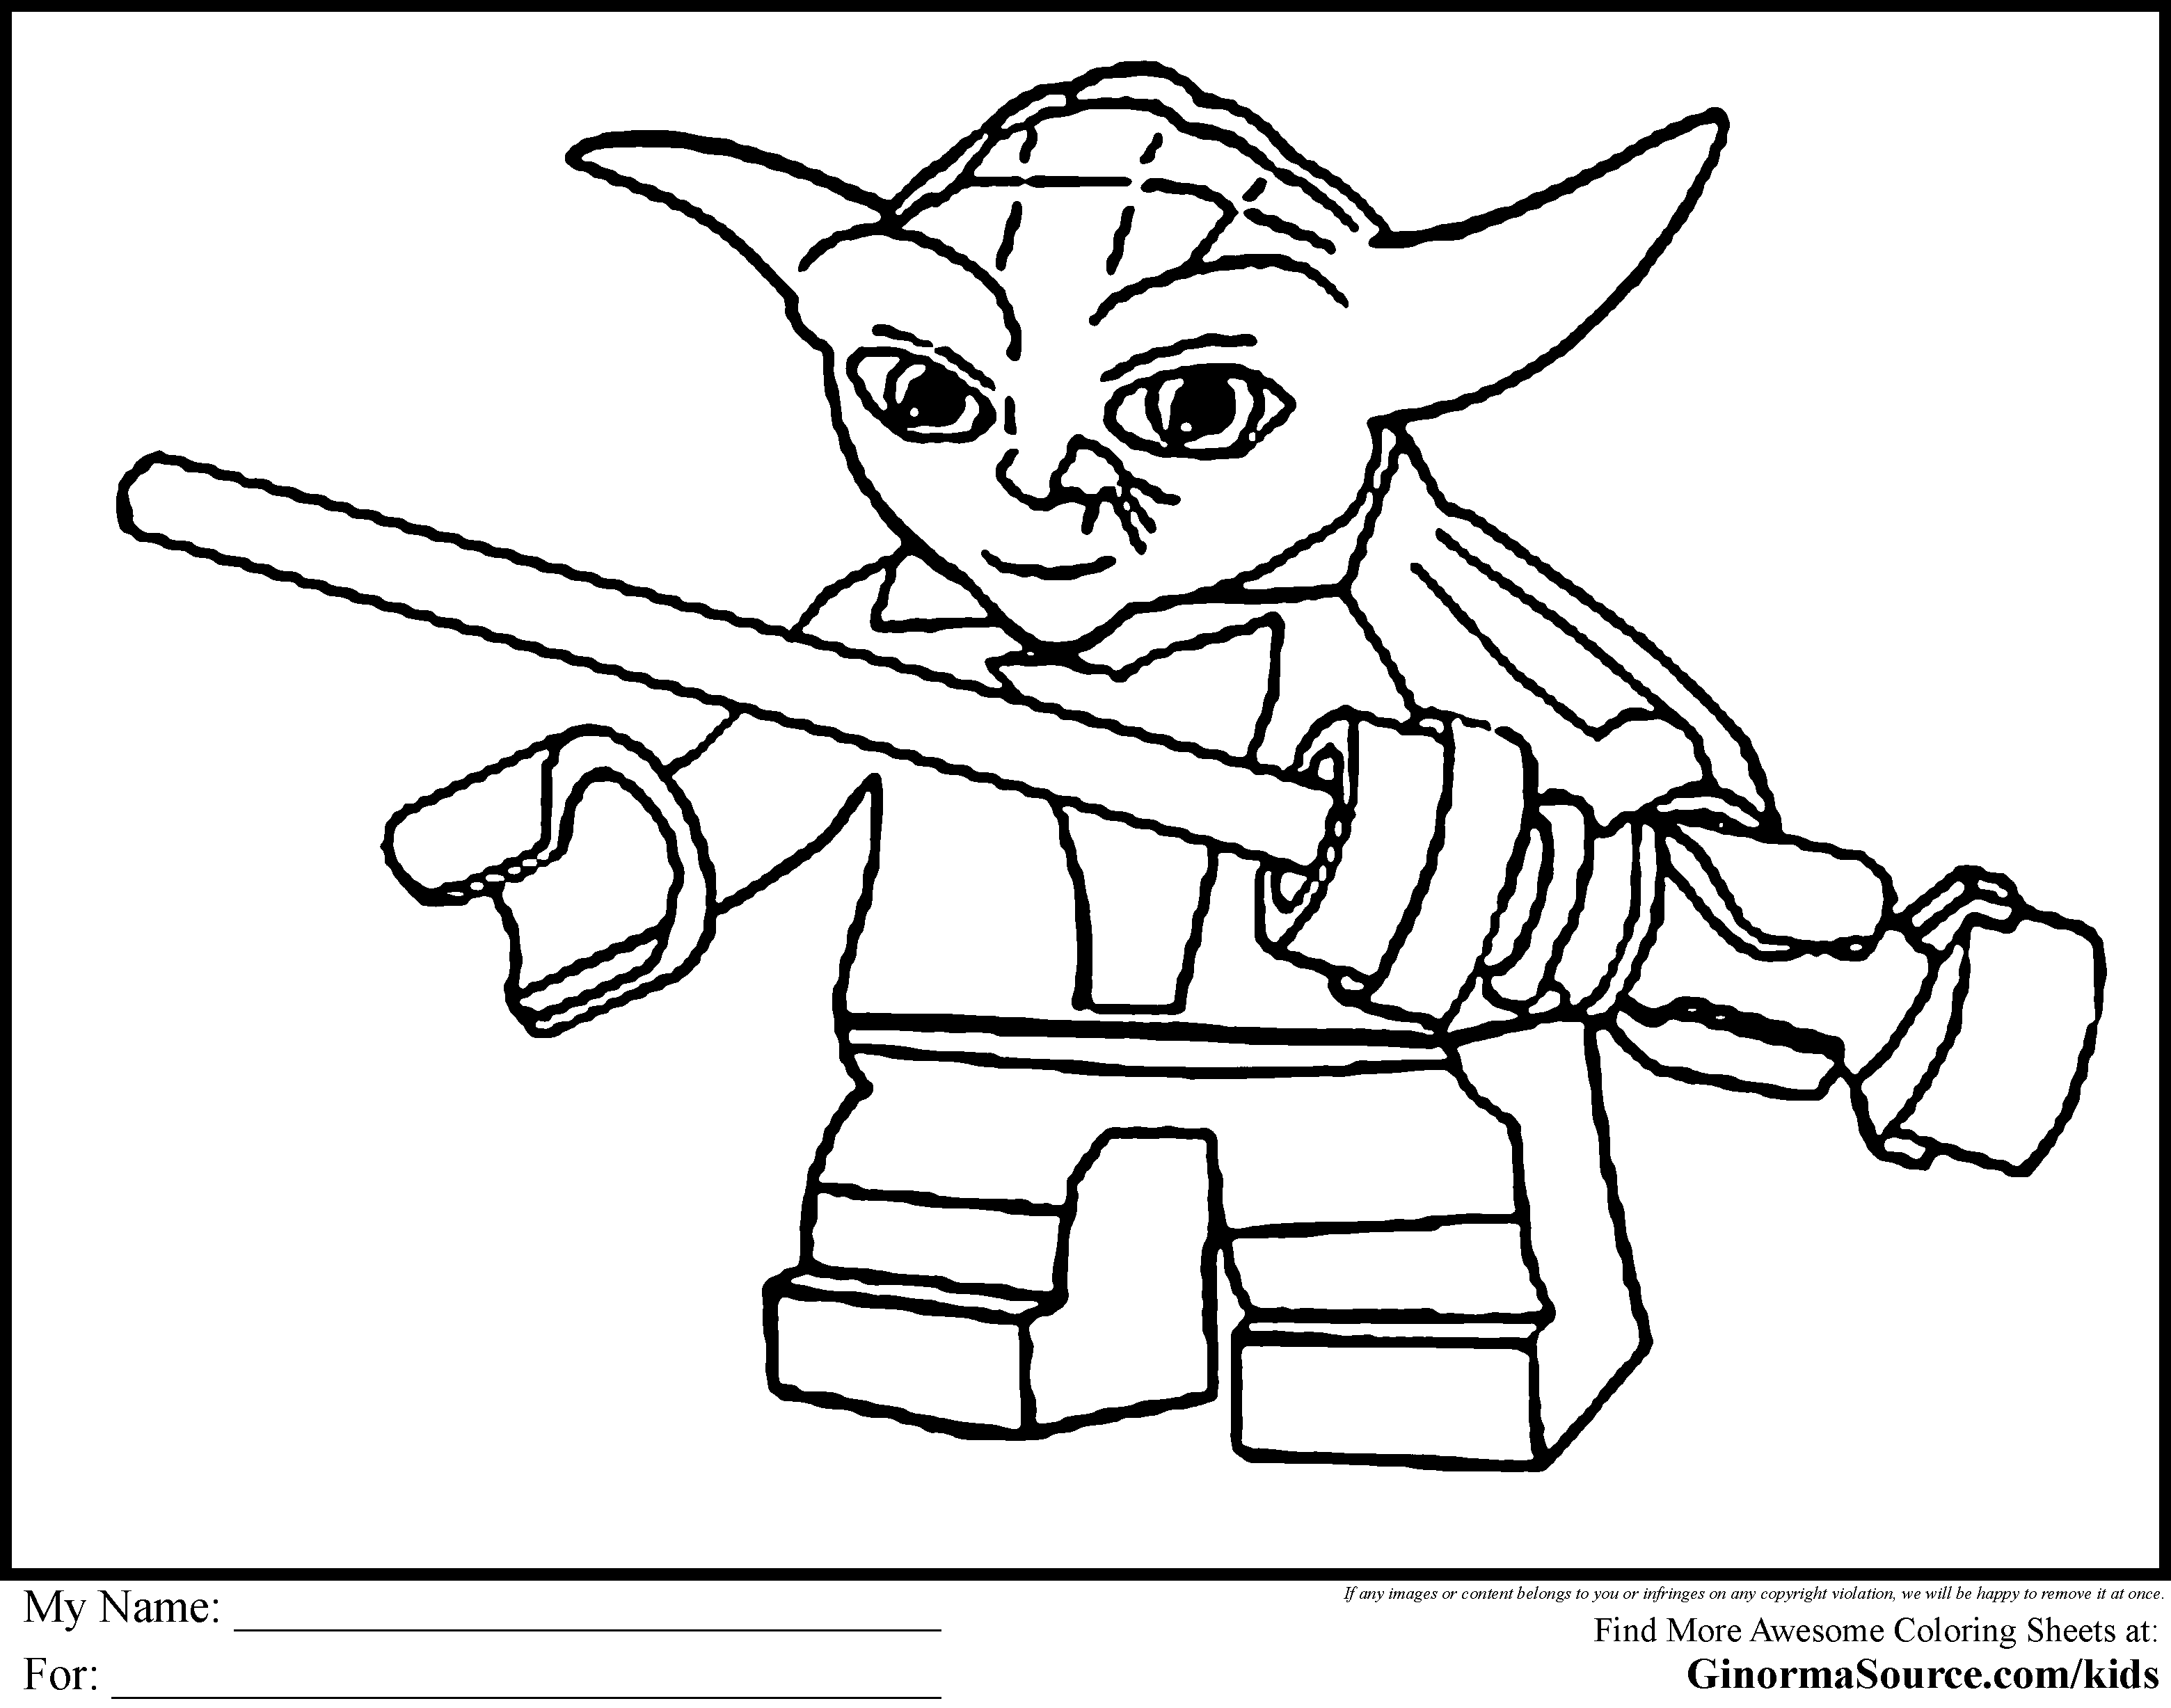 Lego Star Wars Coloring Pages To Download And Print For Free ...